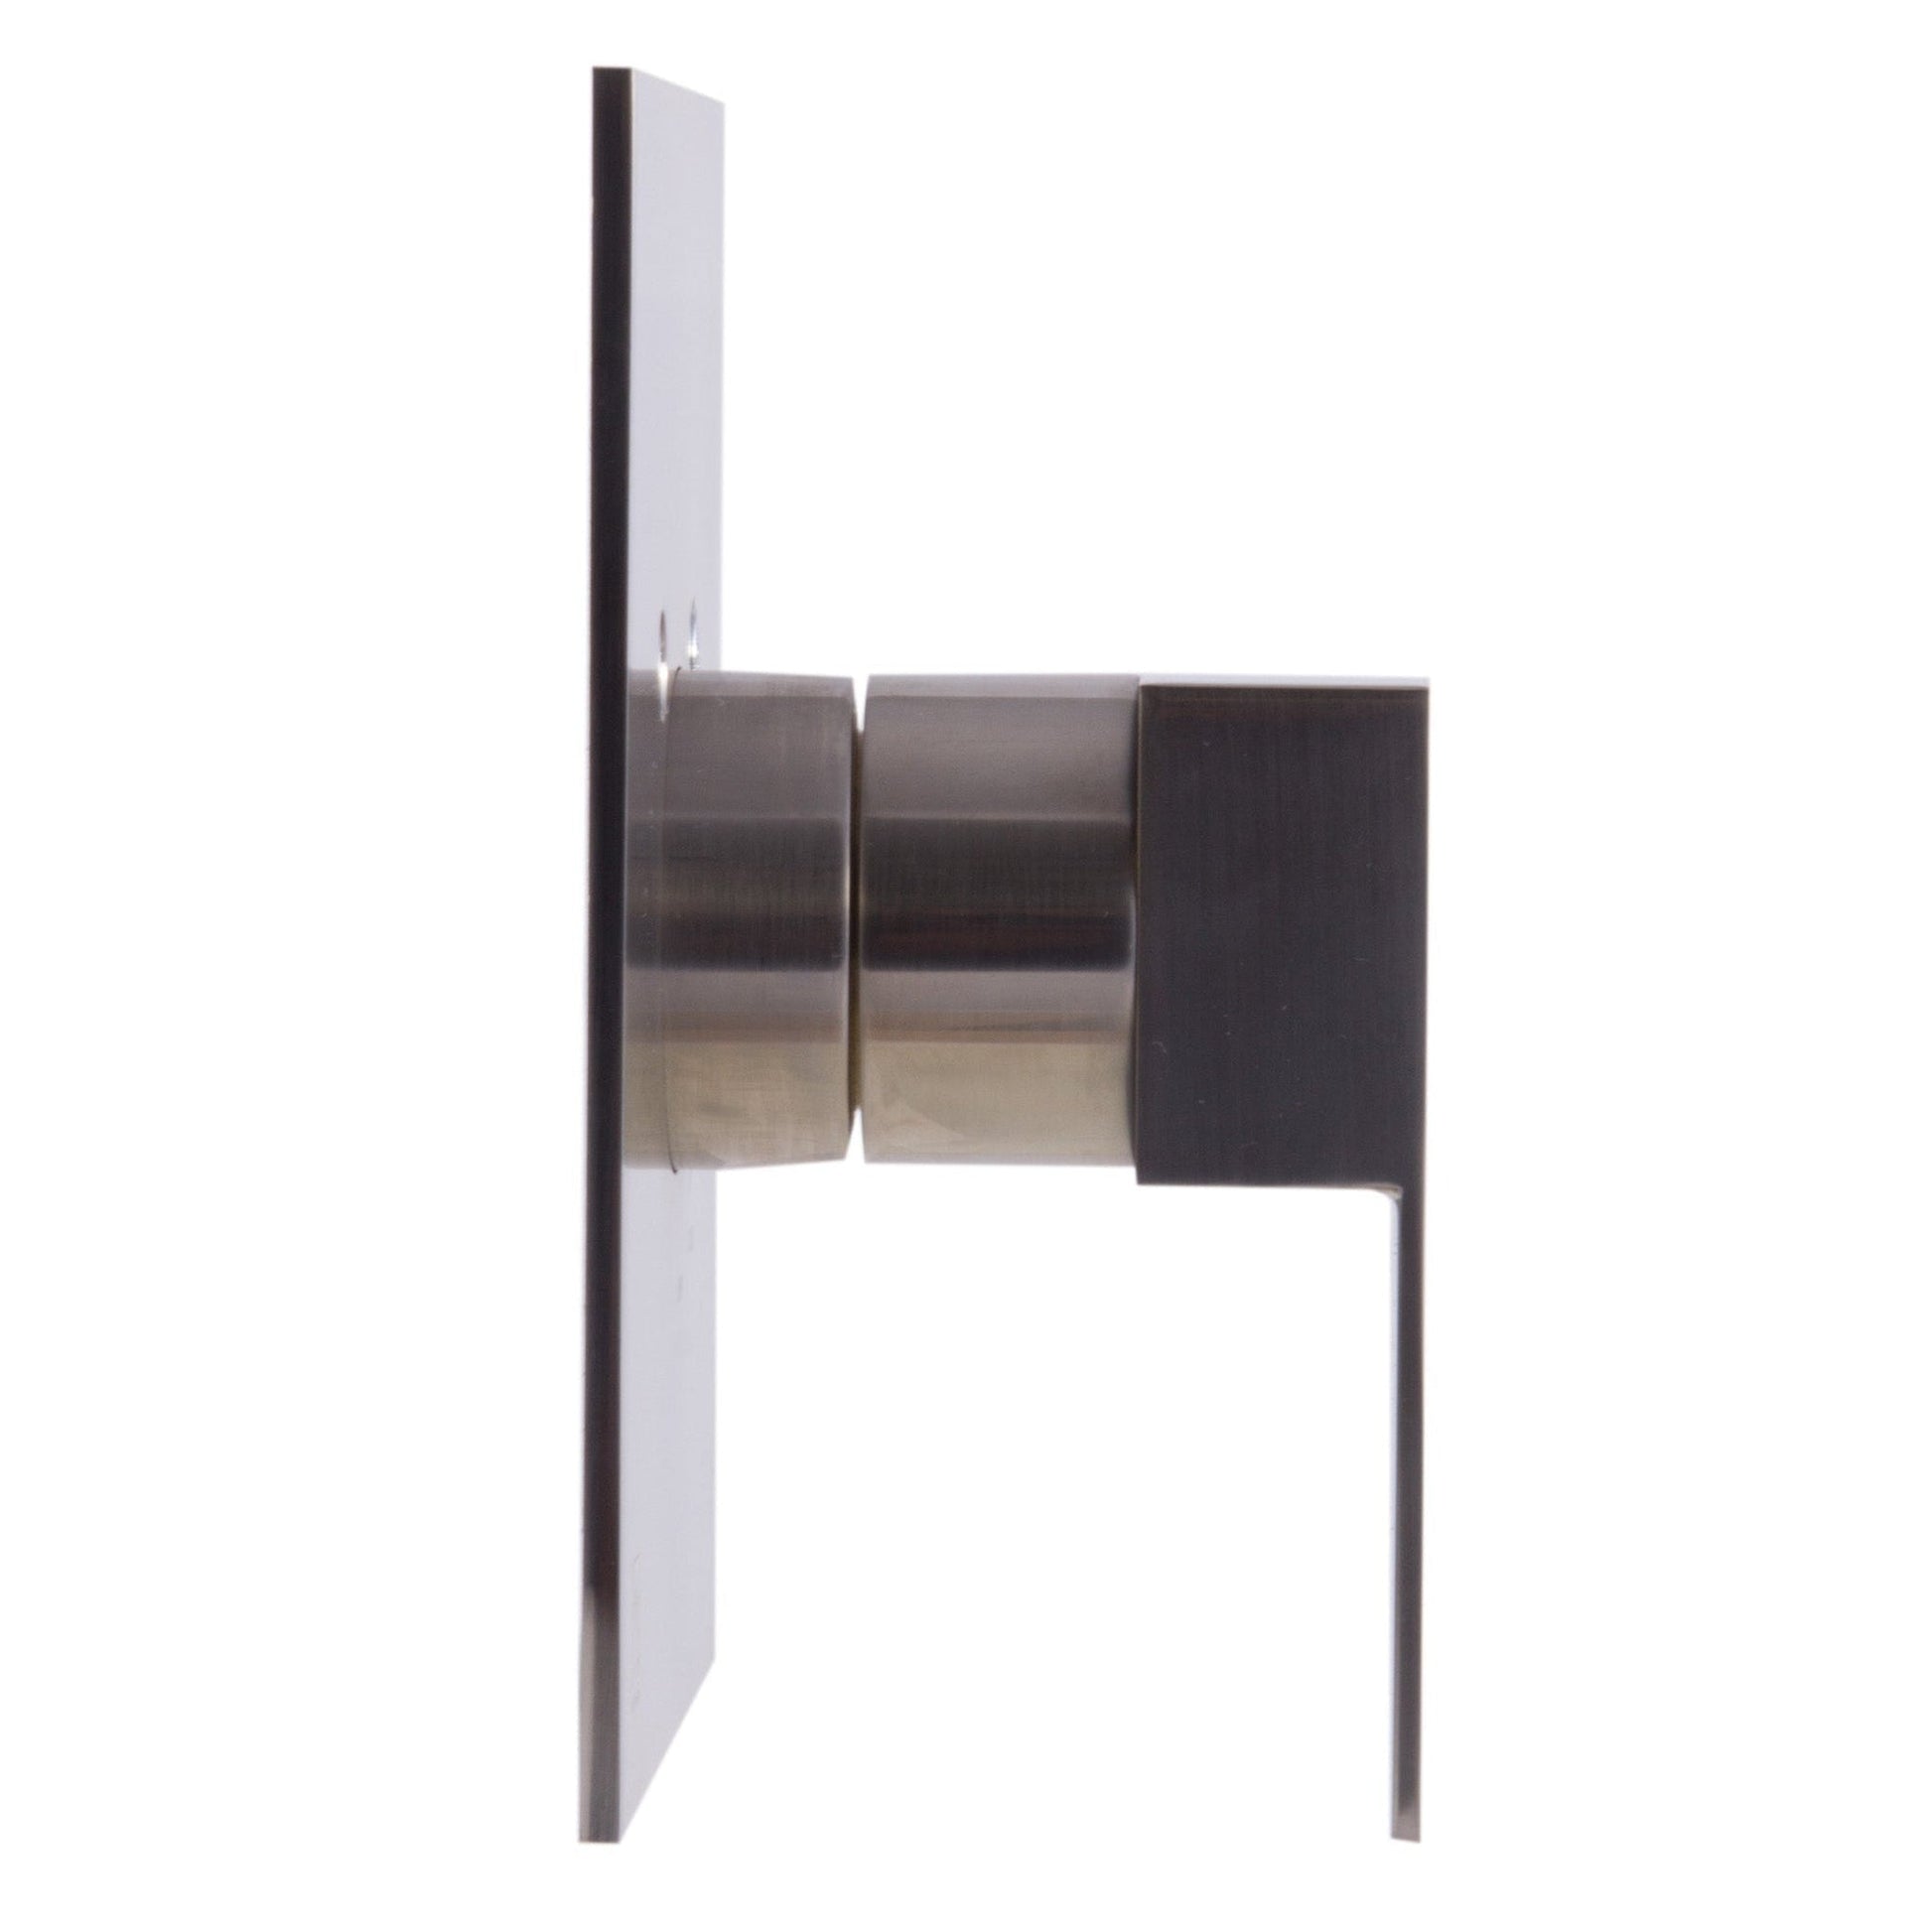 ALFI Brand AB6701-BN Square Brushed Nickel Modern Pressure Balanced Shower Mixer With Single Lever Handle